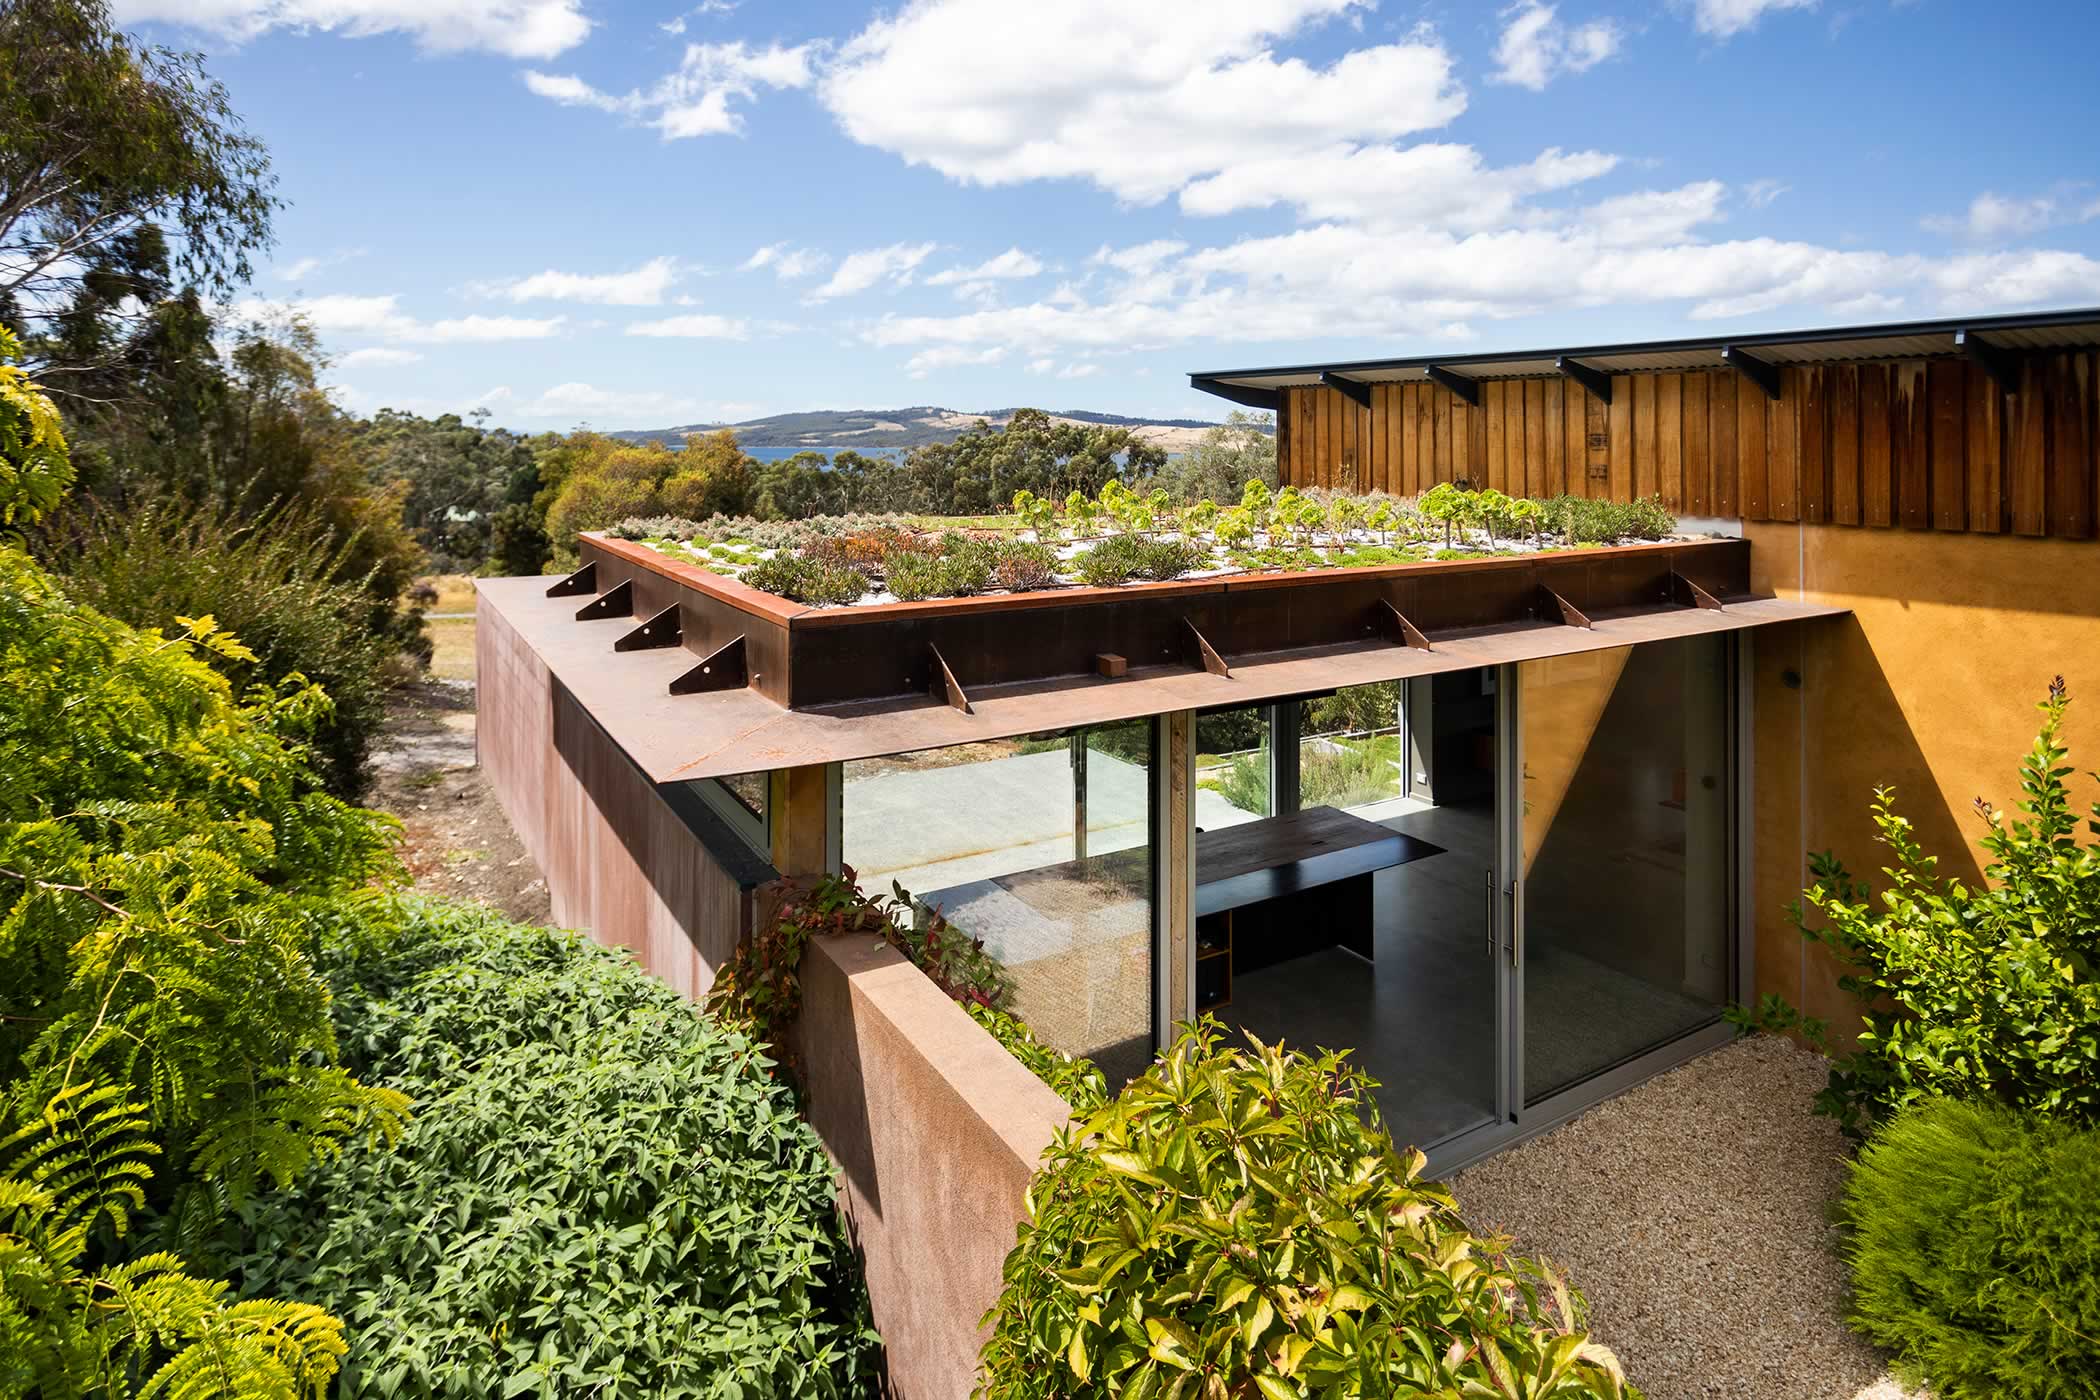 Residential extension, Kettering, Tasmania: A garden roof of succulents accentuates the hidden courtyard quality. Orientated to capture northern warmth and light, steel eaves provide passive sun-control at critical times of year. Photo by Adam Gibson.